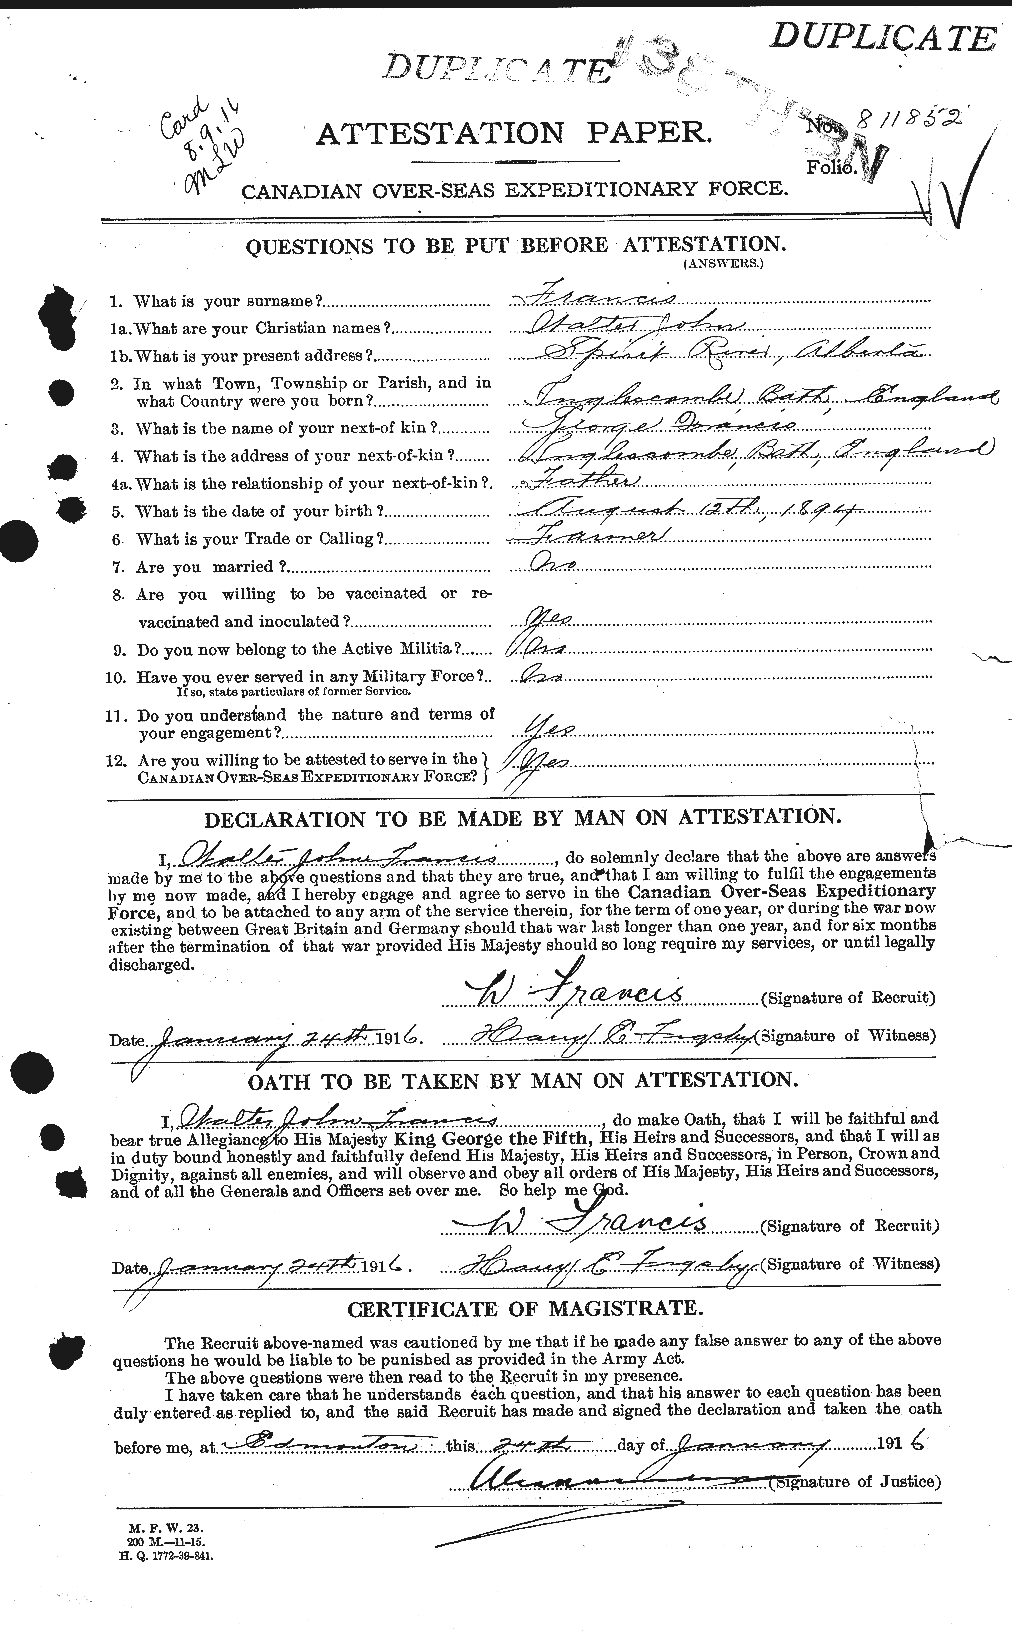 Personnel Records of the First World War - CEF 331941a